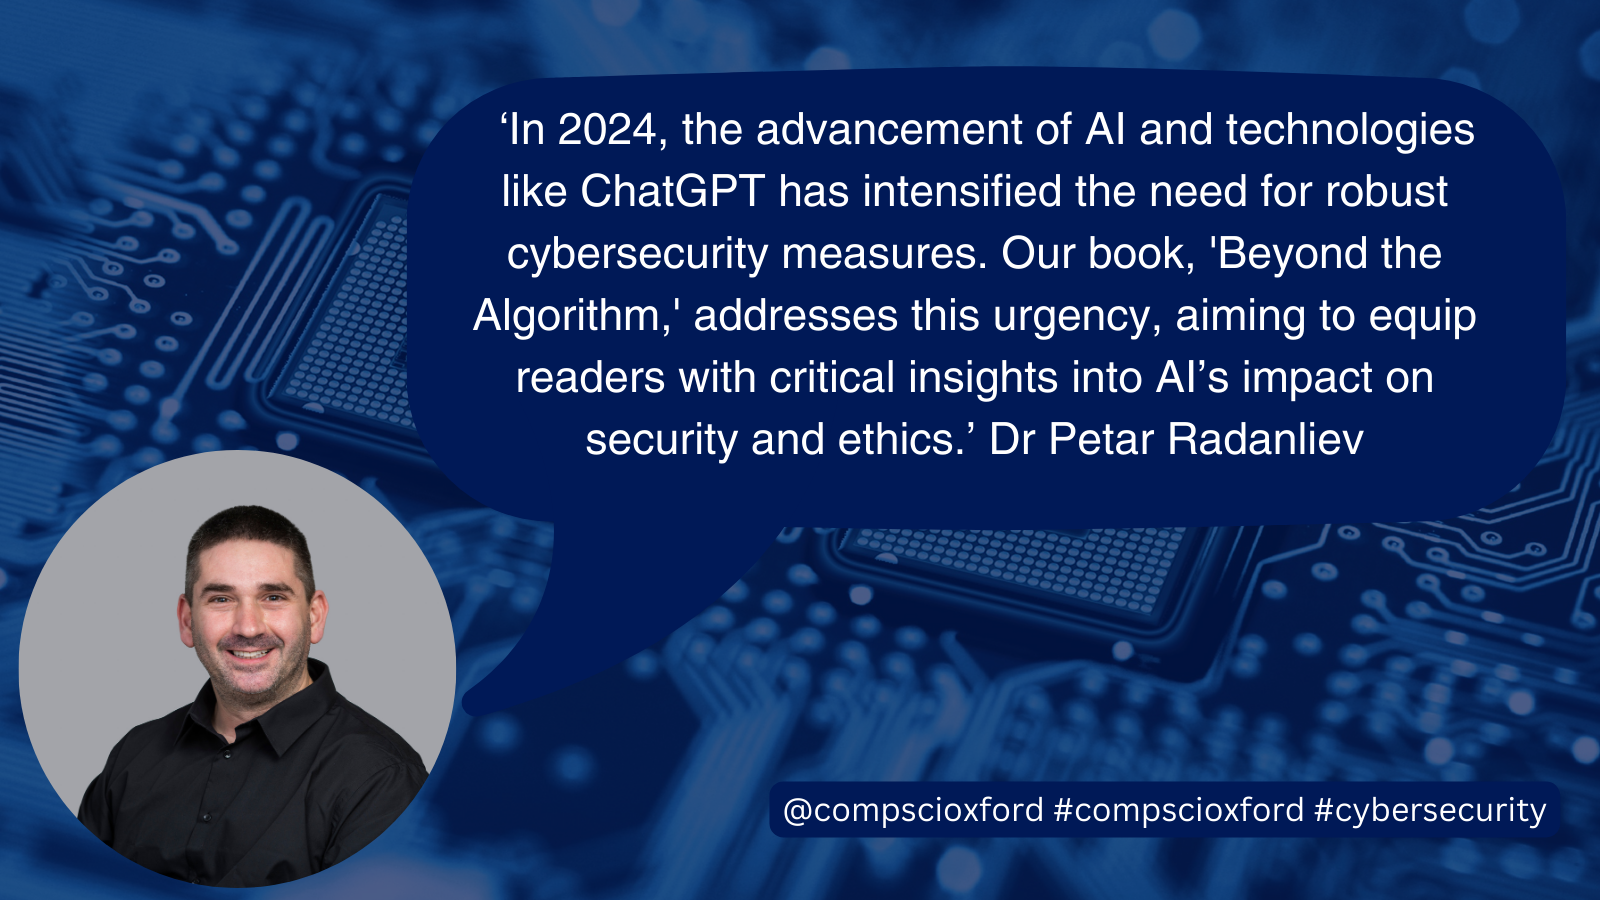 A blue image of a computer board with a dark blue speech bubble over it with text reading "&lsquo;In 2024, the advancement of AI and technologies like ChatGPT has intensified the need for robust cybersecurity measures. Our book, 'Beyond the Algorithm,' addresses this urgency, aiming to equip readers with critical insights into AI&rsquo;s impact on security and ethics.&rsquo; Dr Petar Radanliev", and a smaller blue box with text reading "@compscioxford #compscioxford #cybersecurity", on the bottom left of the image, there is a circular photograph of Dr Petar Radanliev.